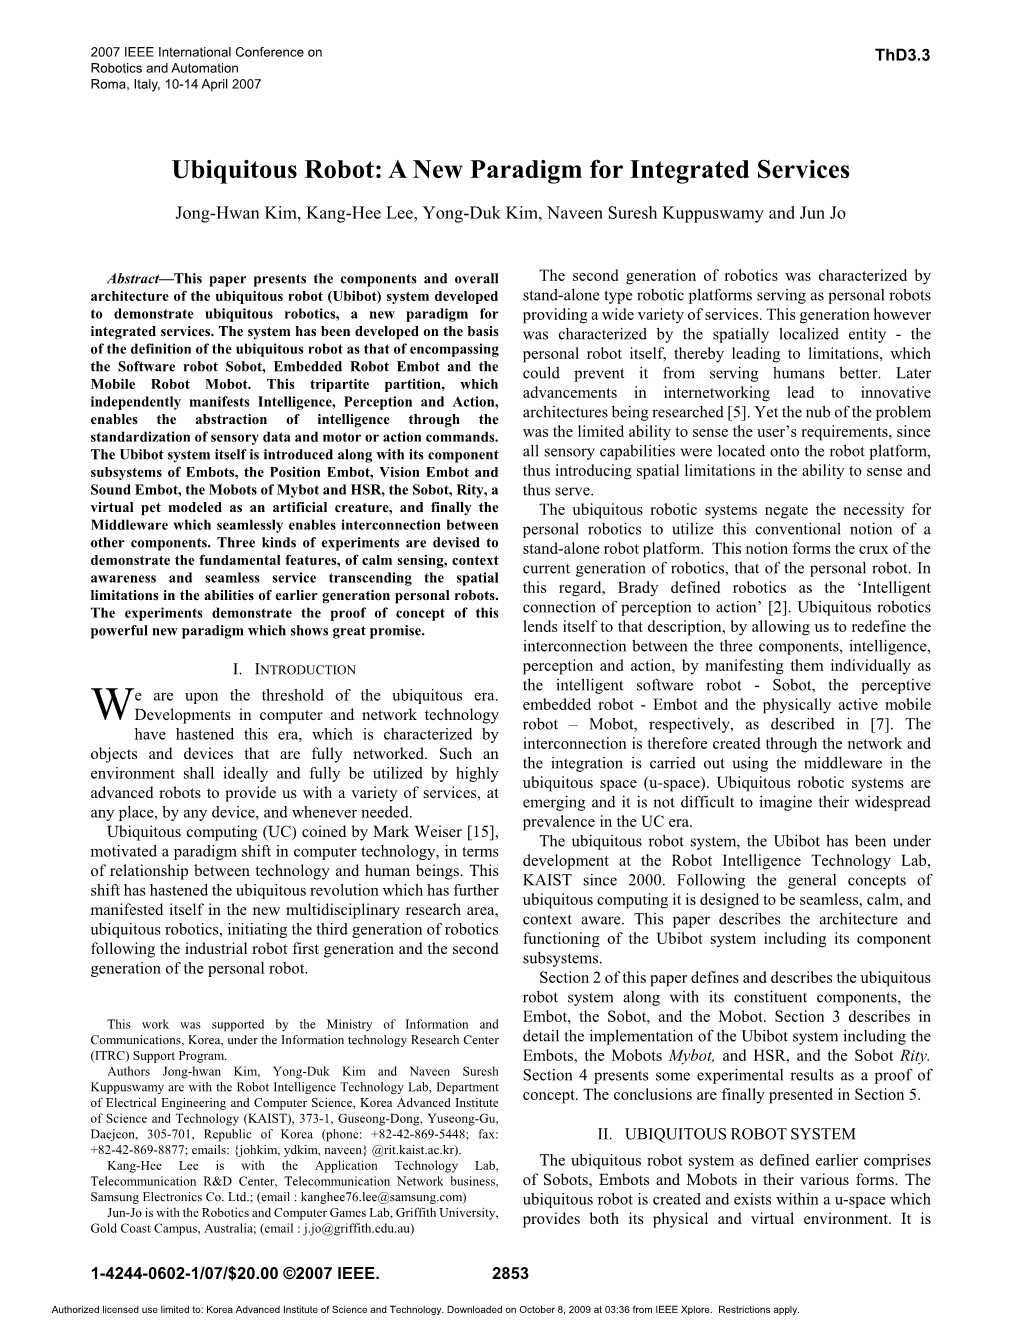 Ubiquitous Robot: a New Paradigm for Integrated Services